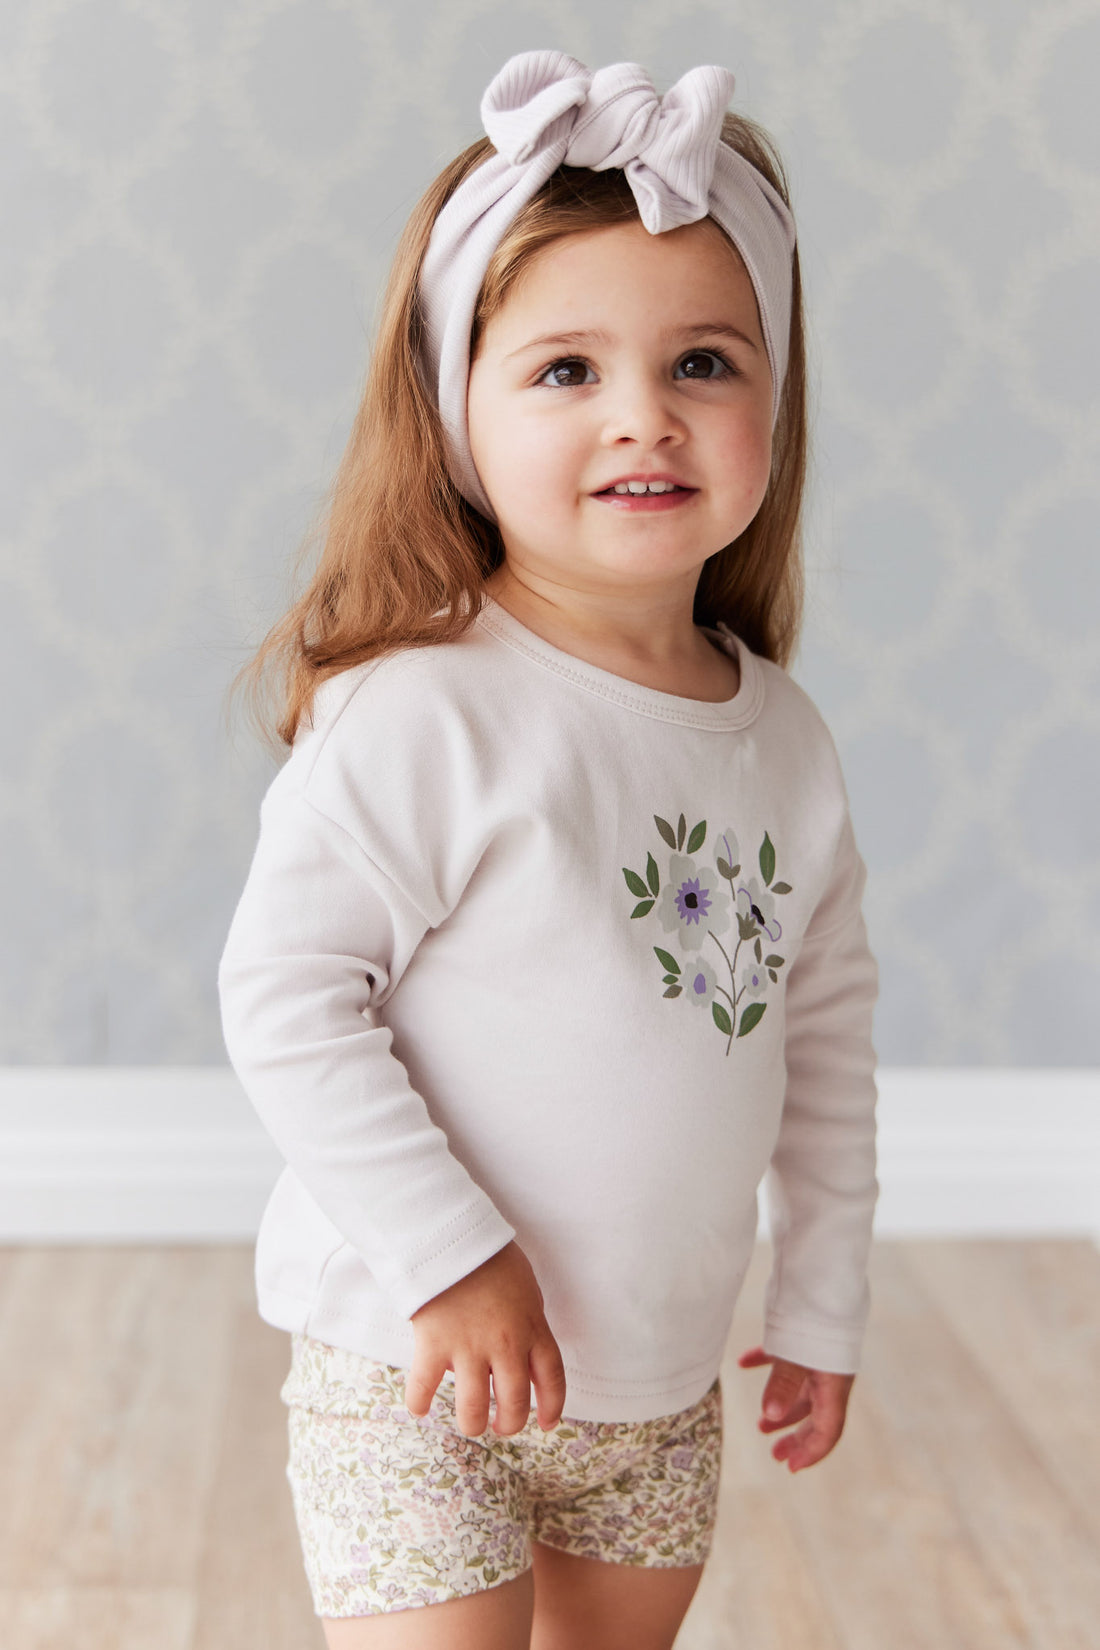 Pima Cotton Marley Long Sleeve Top - Luna Childrens Top from Jamie Kay NZ